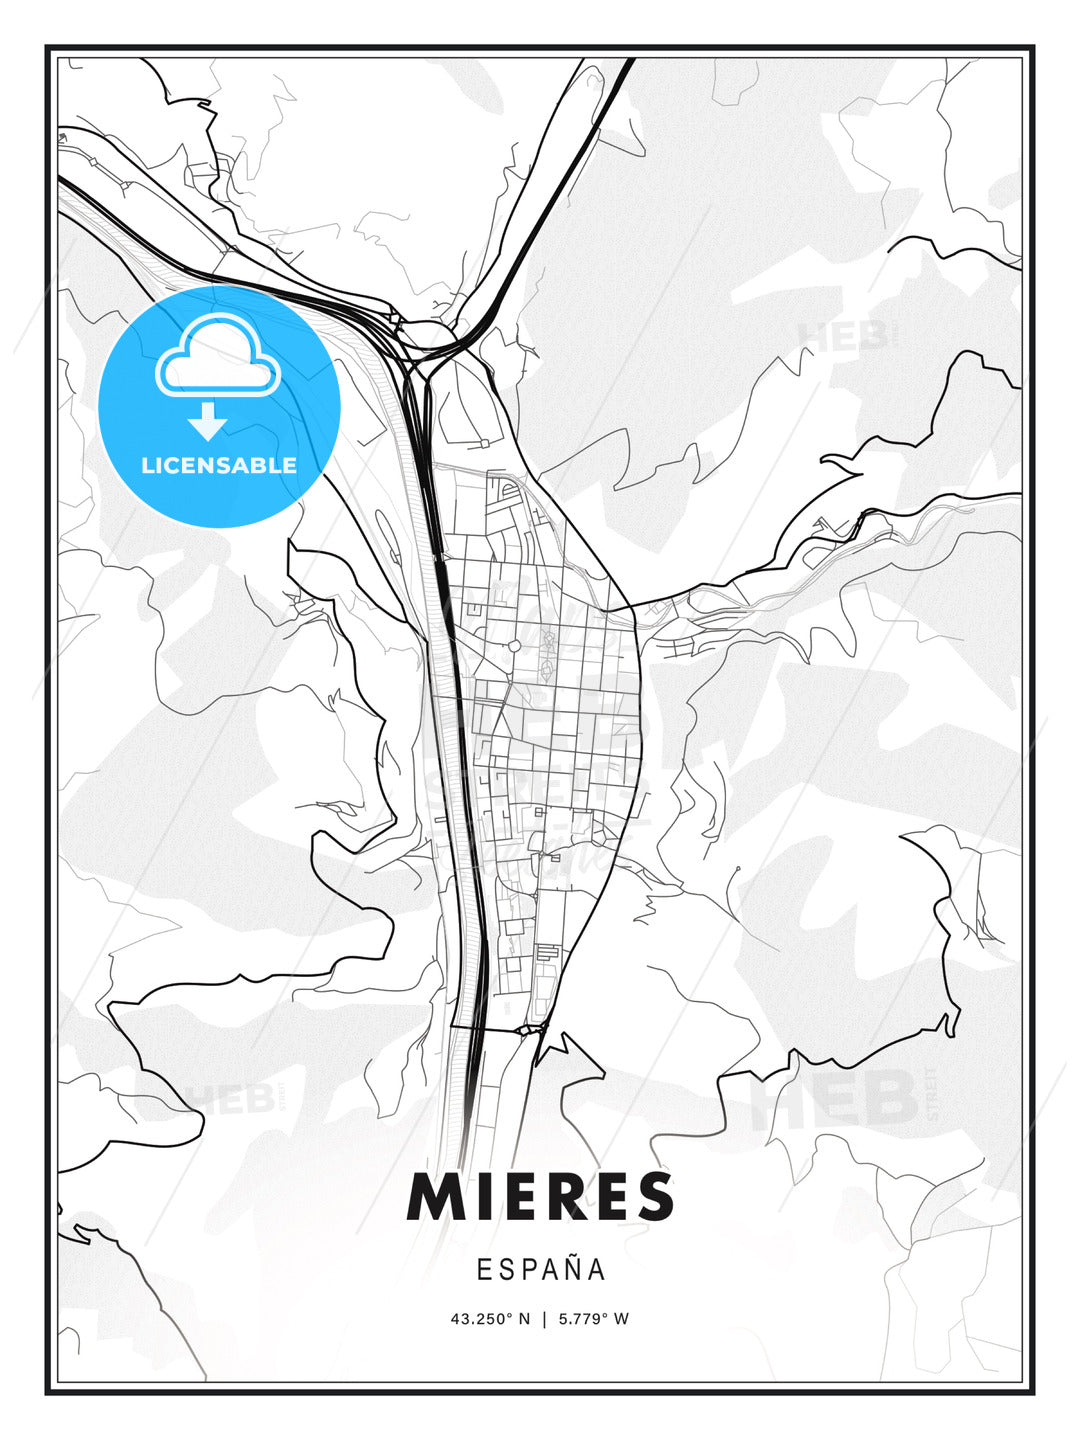 Mieres, Spain, Modern Print Template in Various Formats - HEBSTREITS Sketches